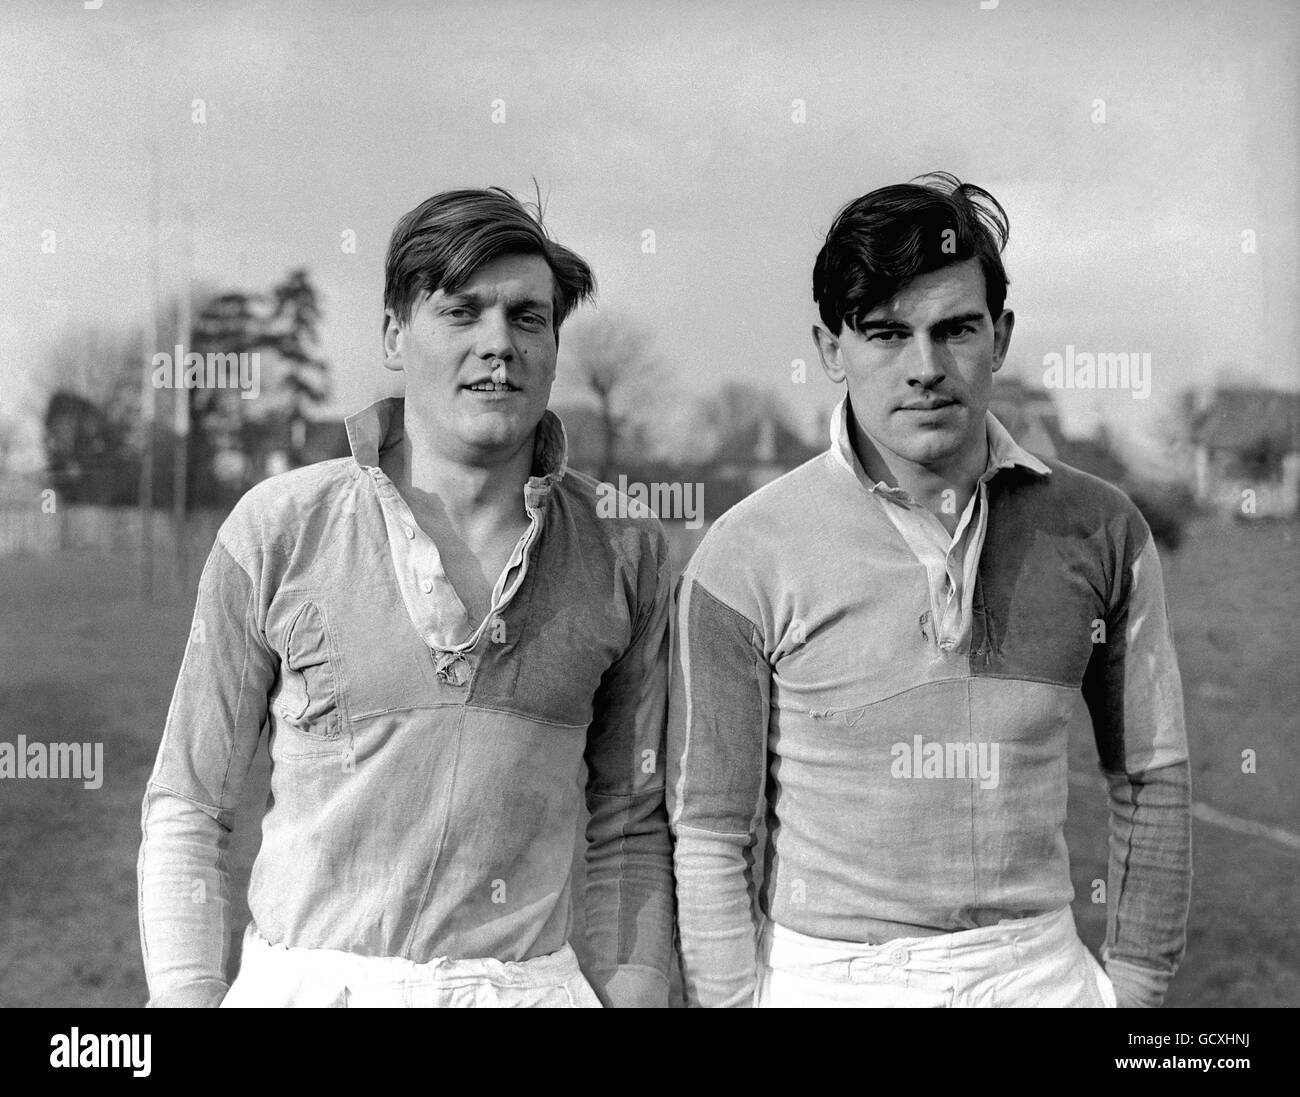 Rugby Union - Harlequins Photocall. RS Relf (left) and ME Kershaw, Harlequins Stock Photo